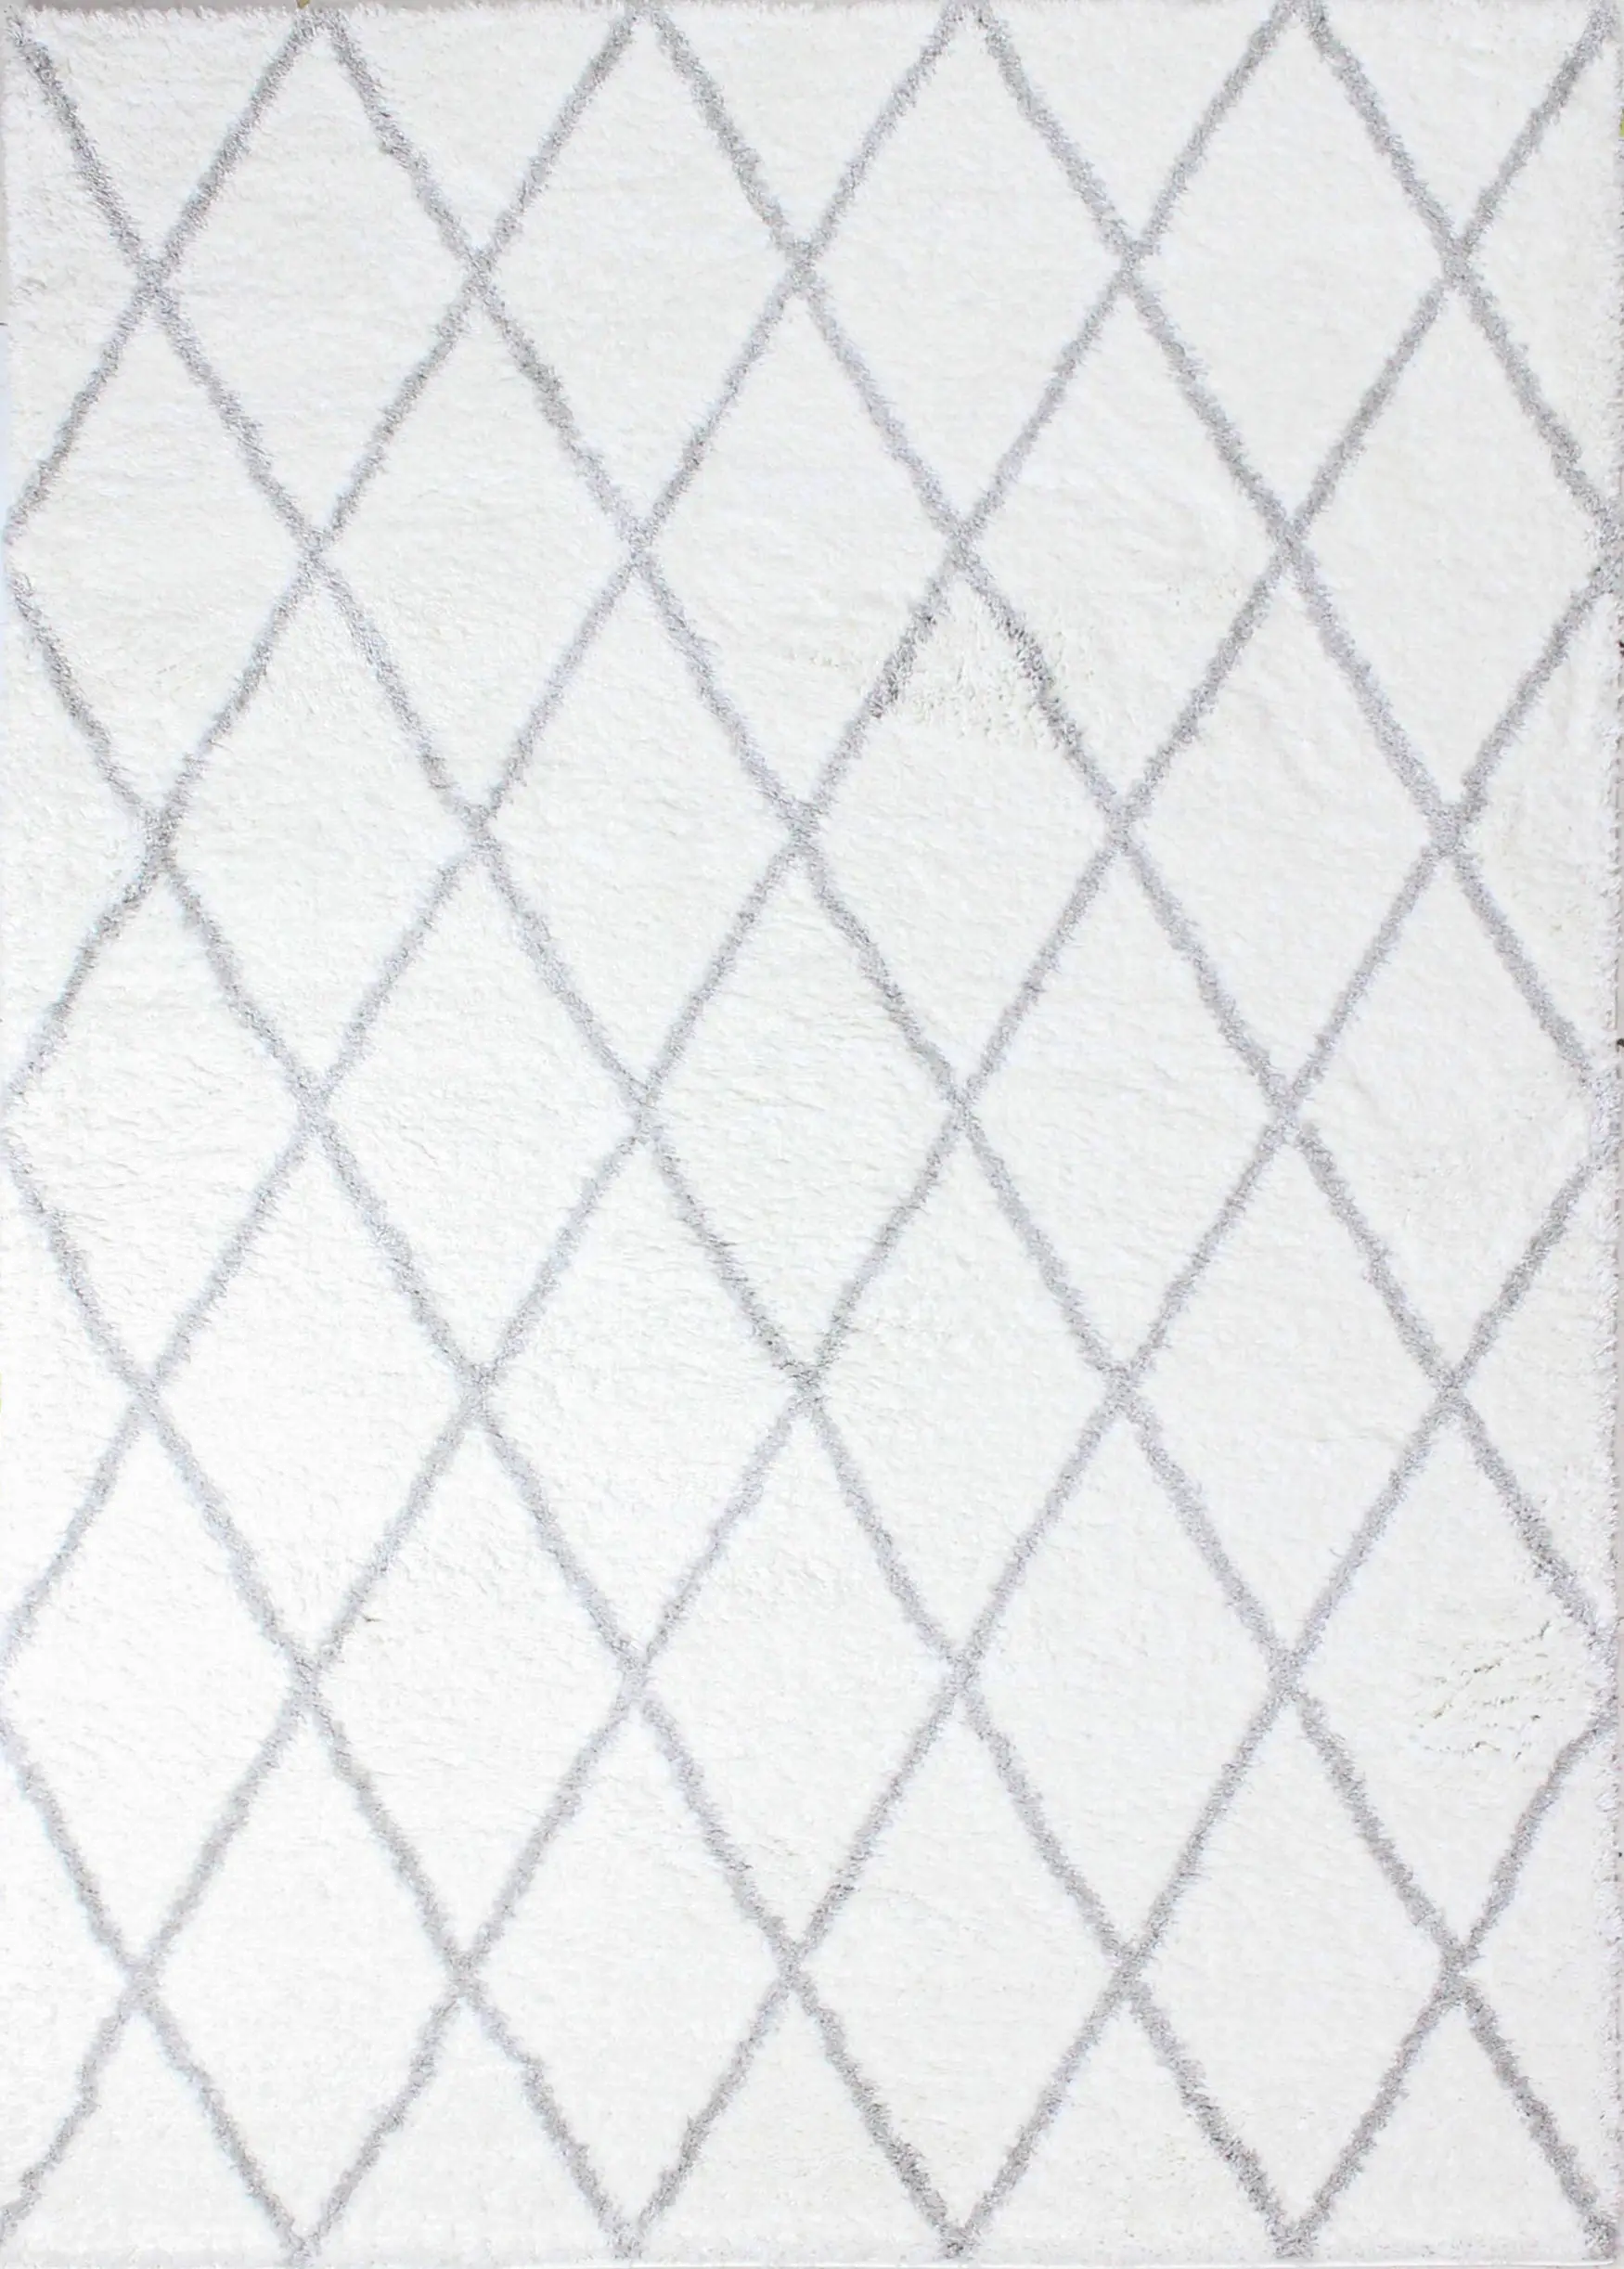 Faris White and Gray 4 x 6 Area Rug